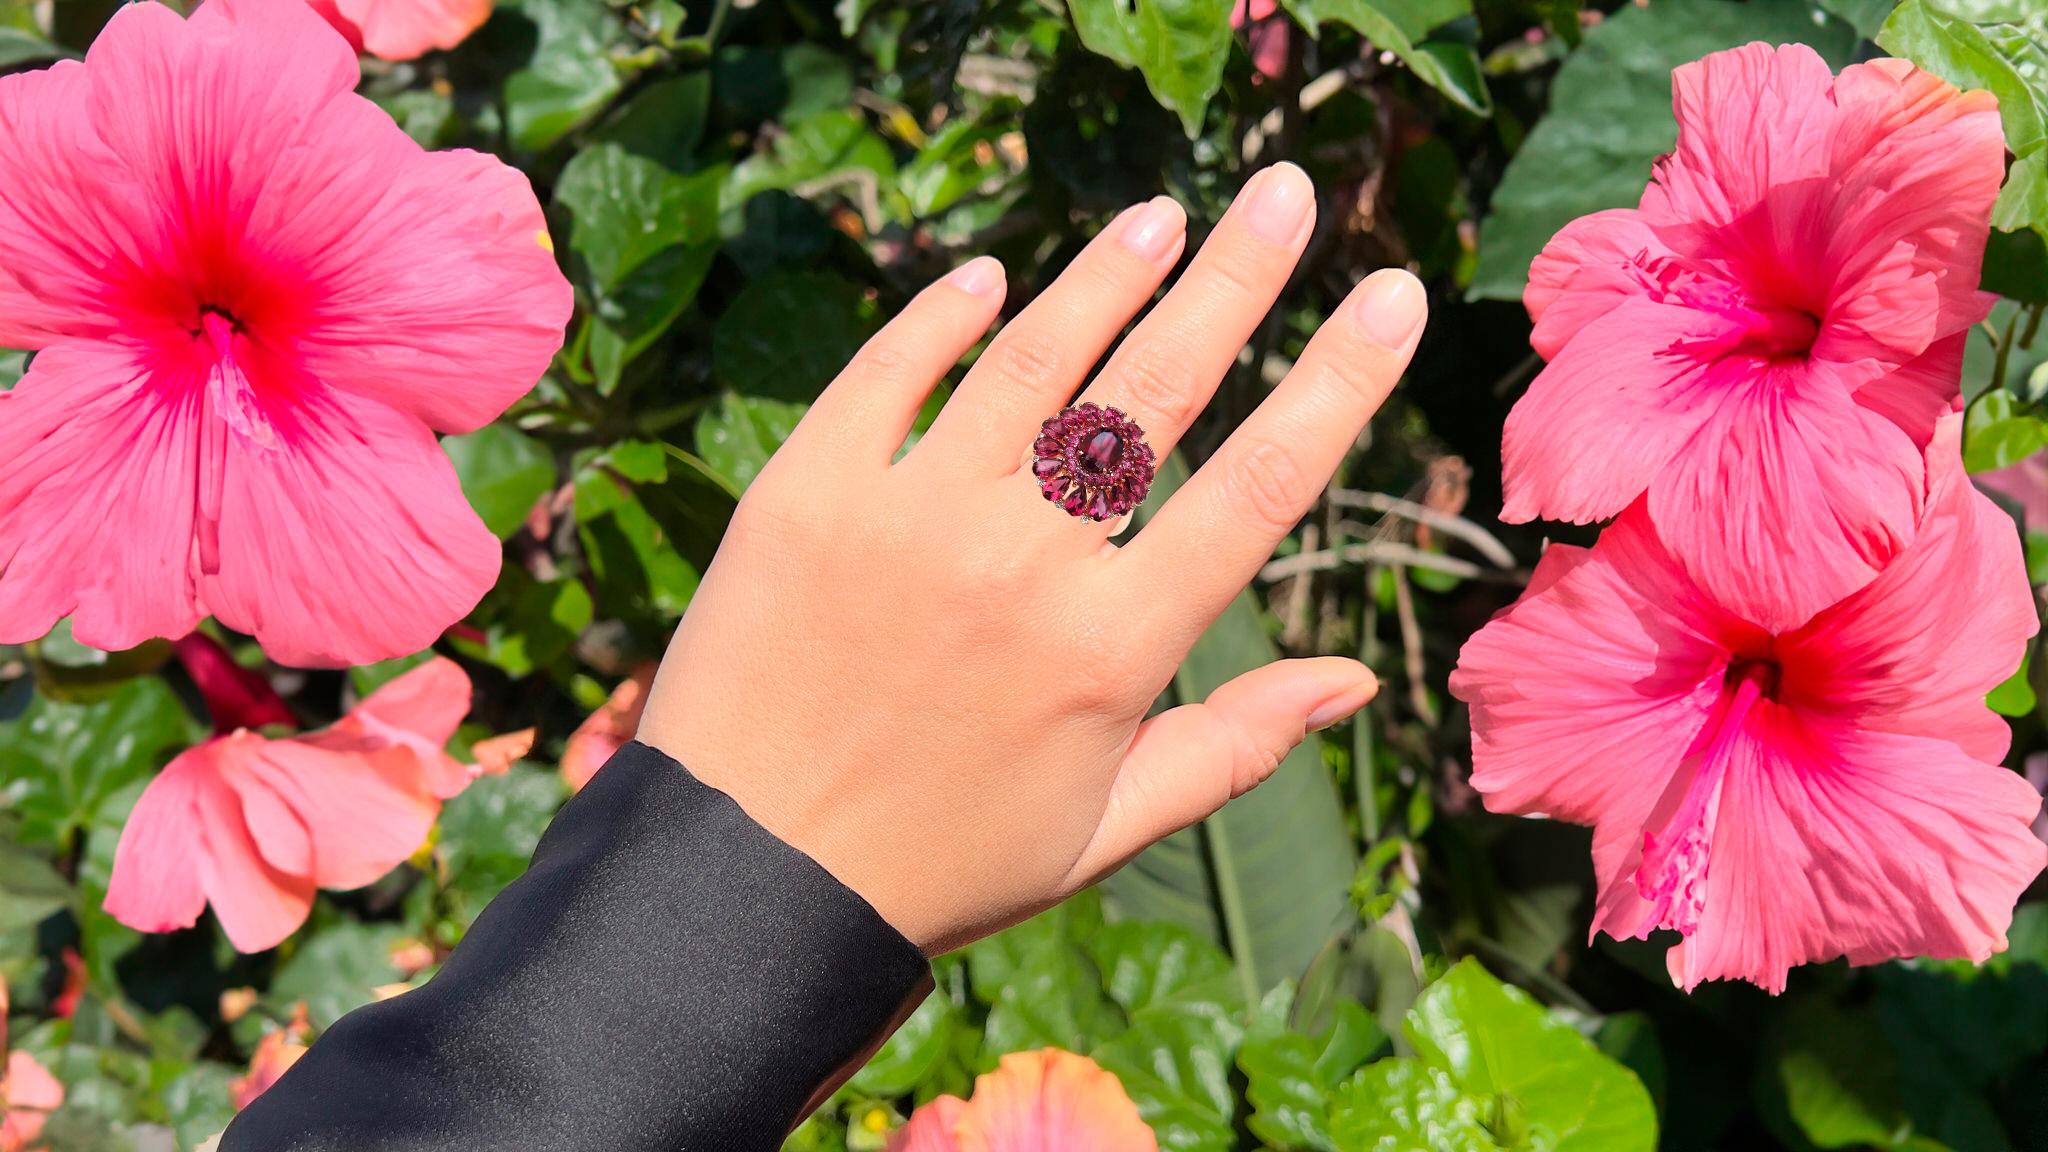 It comes with the Gemological Appraisal by GIA GG/AJP
All Gemstones are Natural
29 Rhodolites = 6.07 Carats
14 White Topazes = 0.22 Carats
Metal: 14K Rose Gold Plated Sterling Silver
Ring Size: 8* US
*It can be resized complimentary